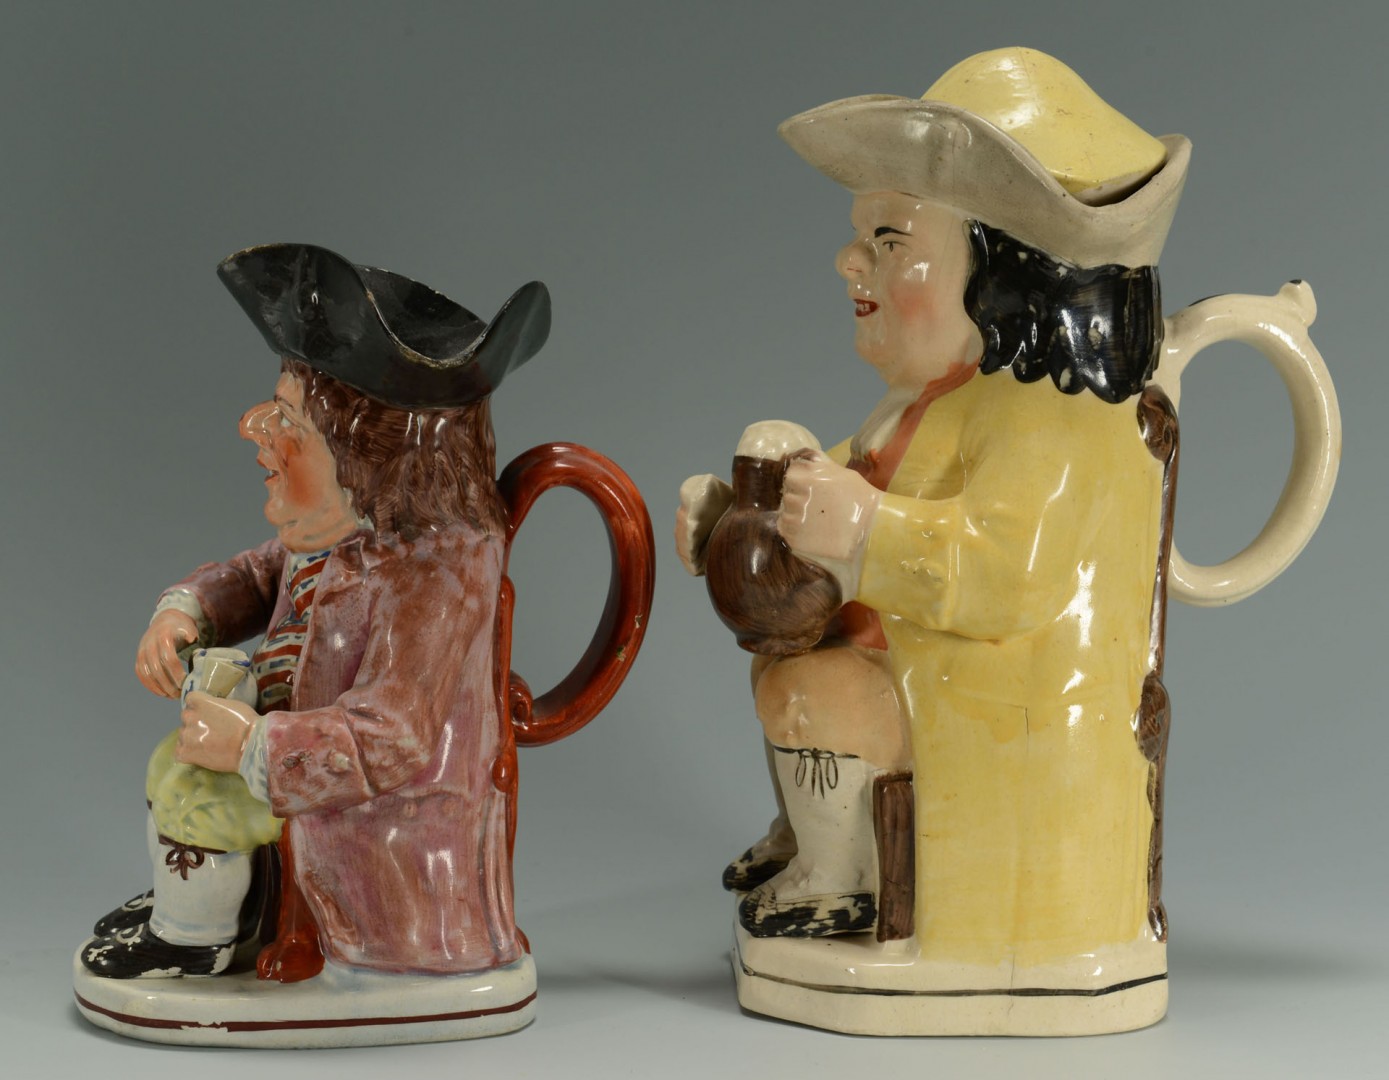 Lot 270: 2 Early Toby Jugs including The Sinner